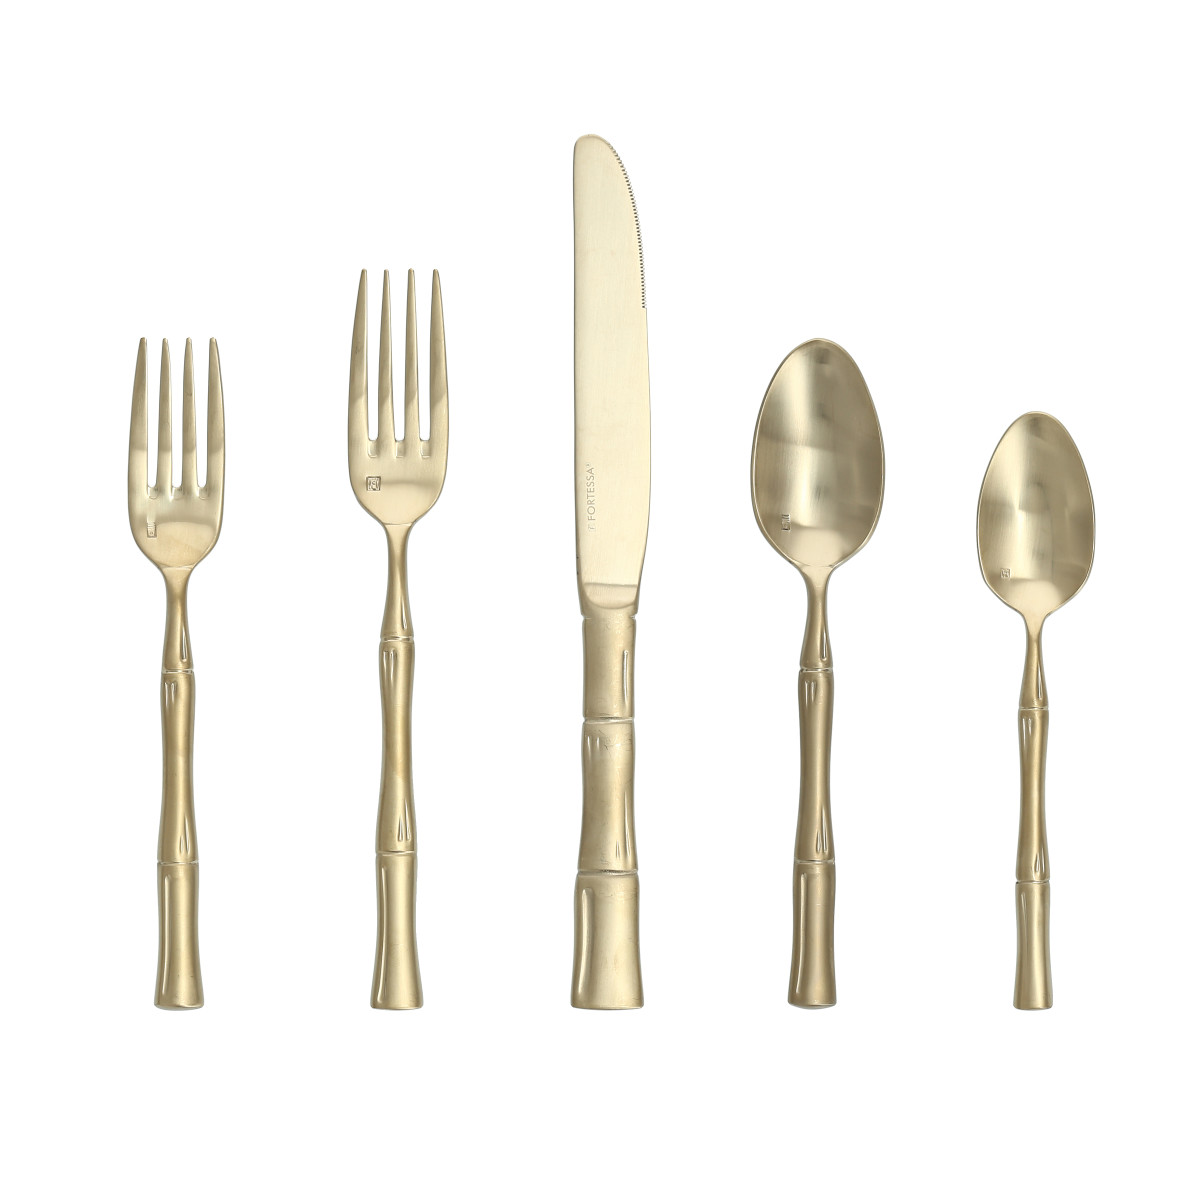 Royal Pacific Flatware, Brushed Champagne, 5-Piece Set